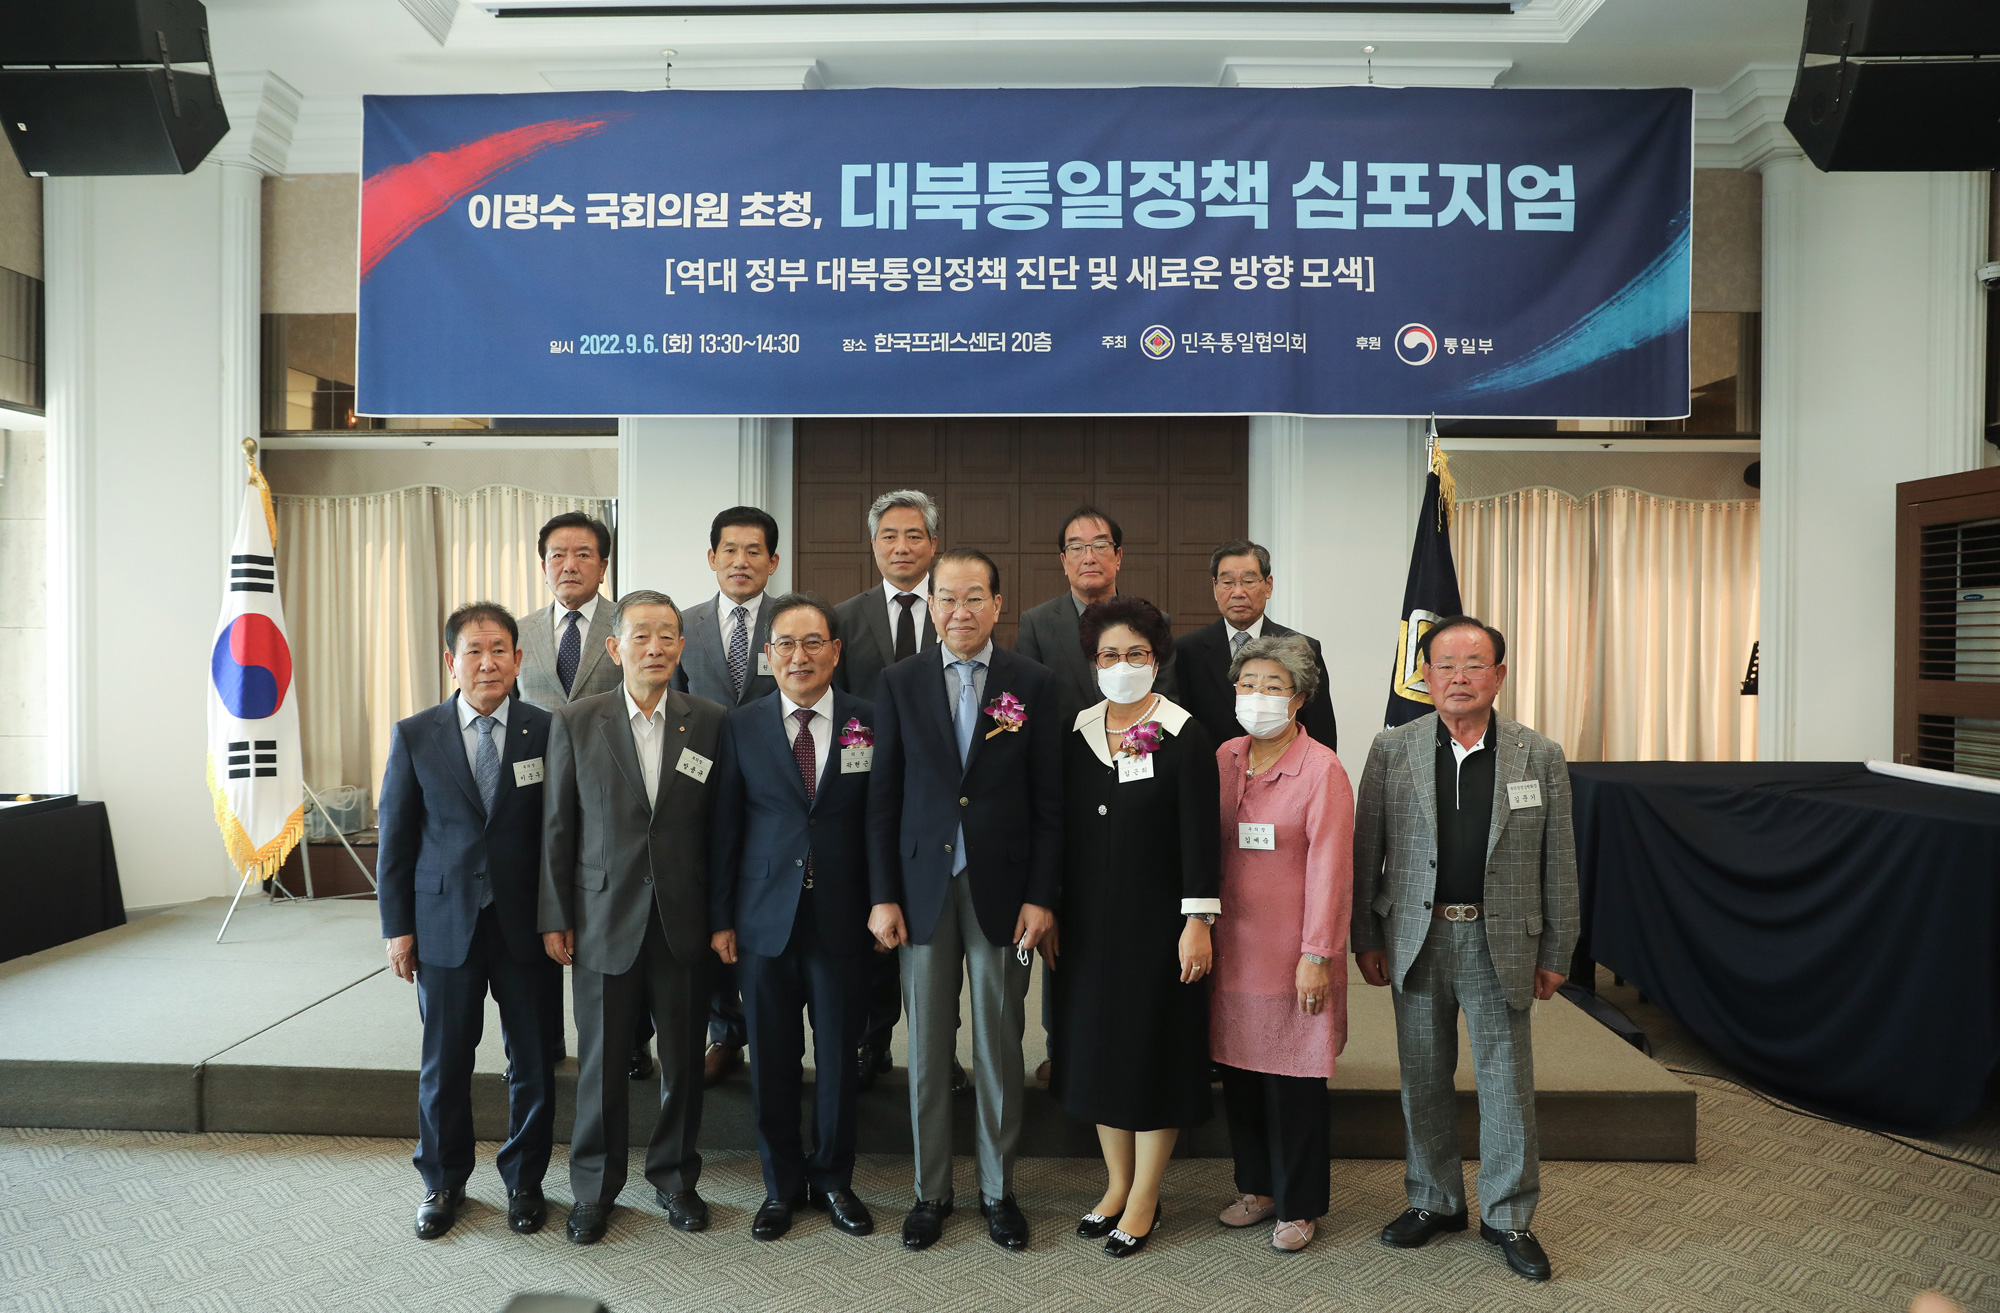 Unification Minister Kwon Youngse delivers congratulatory remarks at symposium hosted by the Central Association for National Unification of Korea